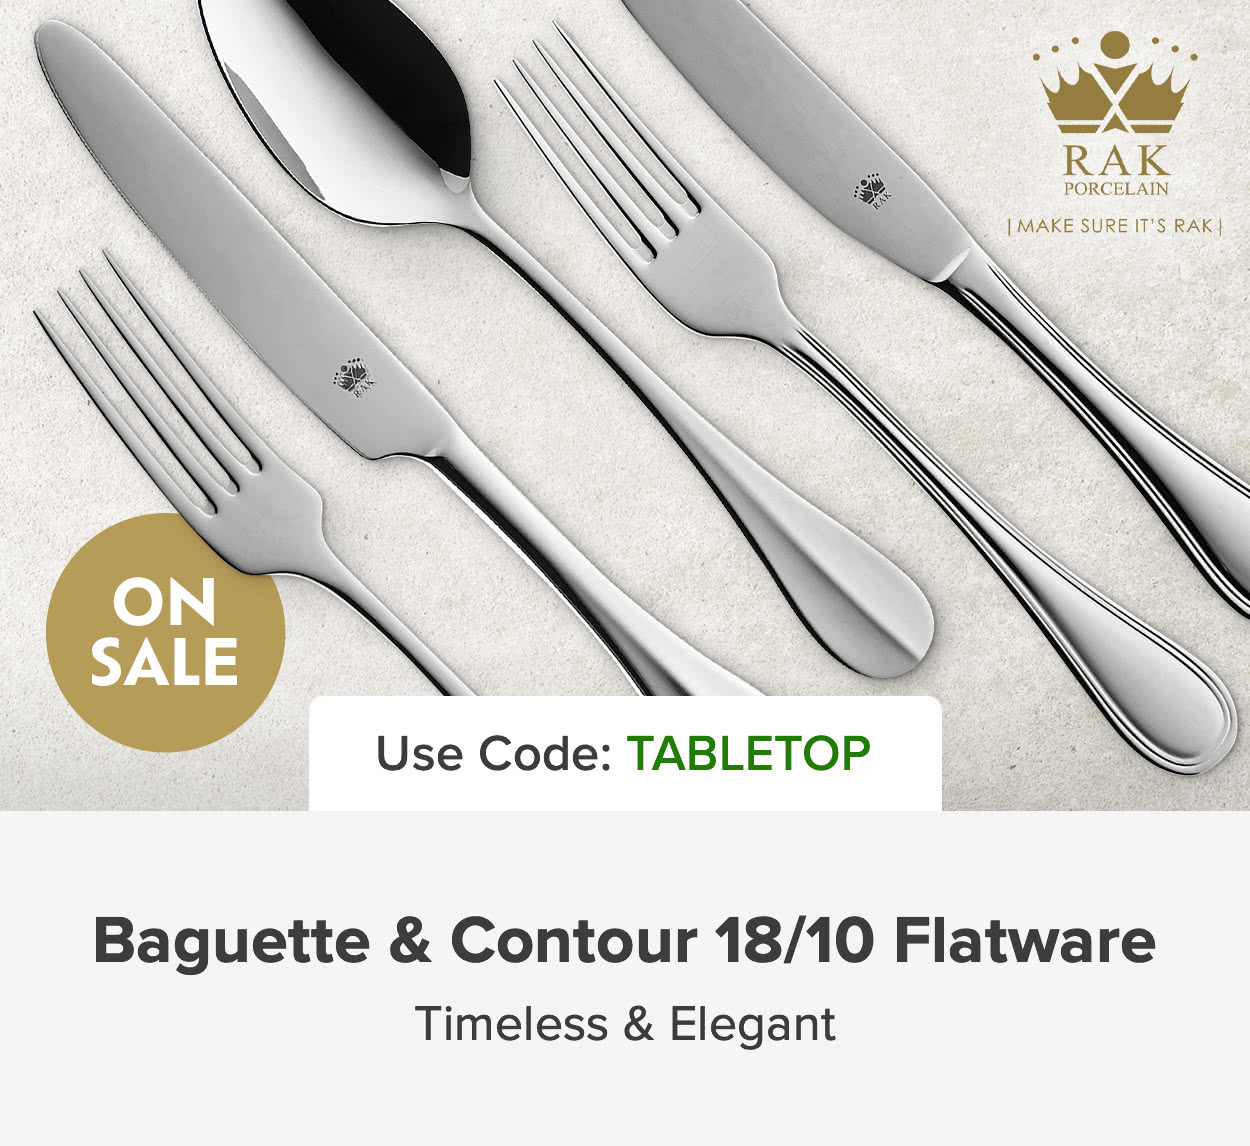 Baguette & Contour 18/10 Flatware on Sale This Week Only